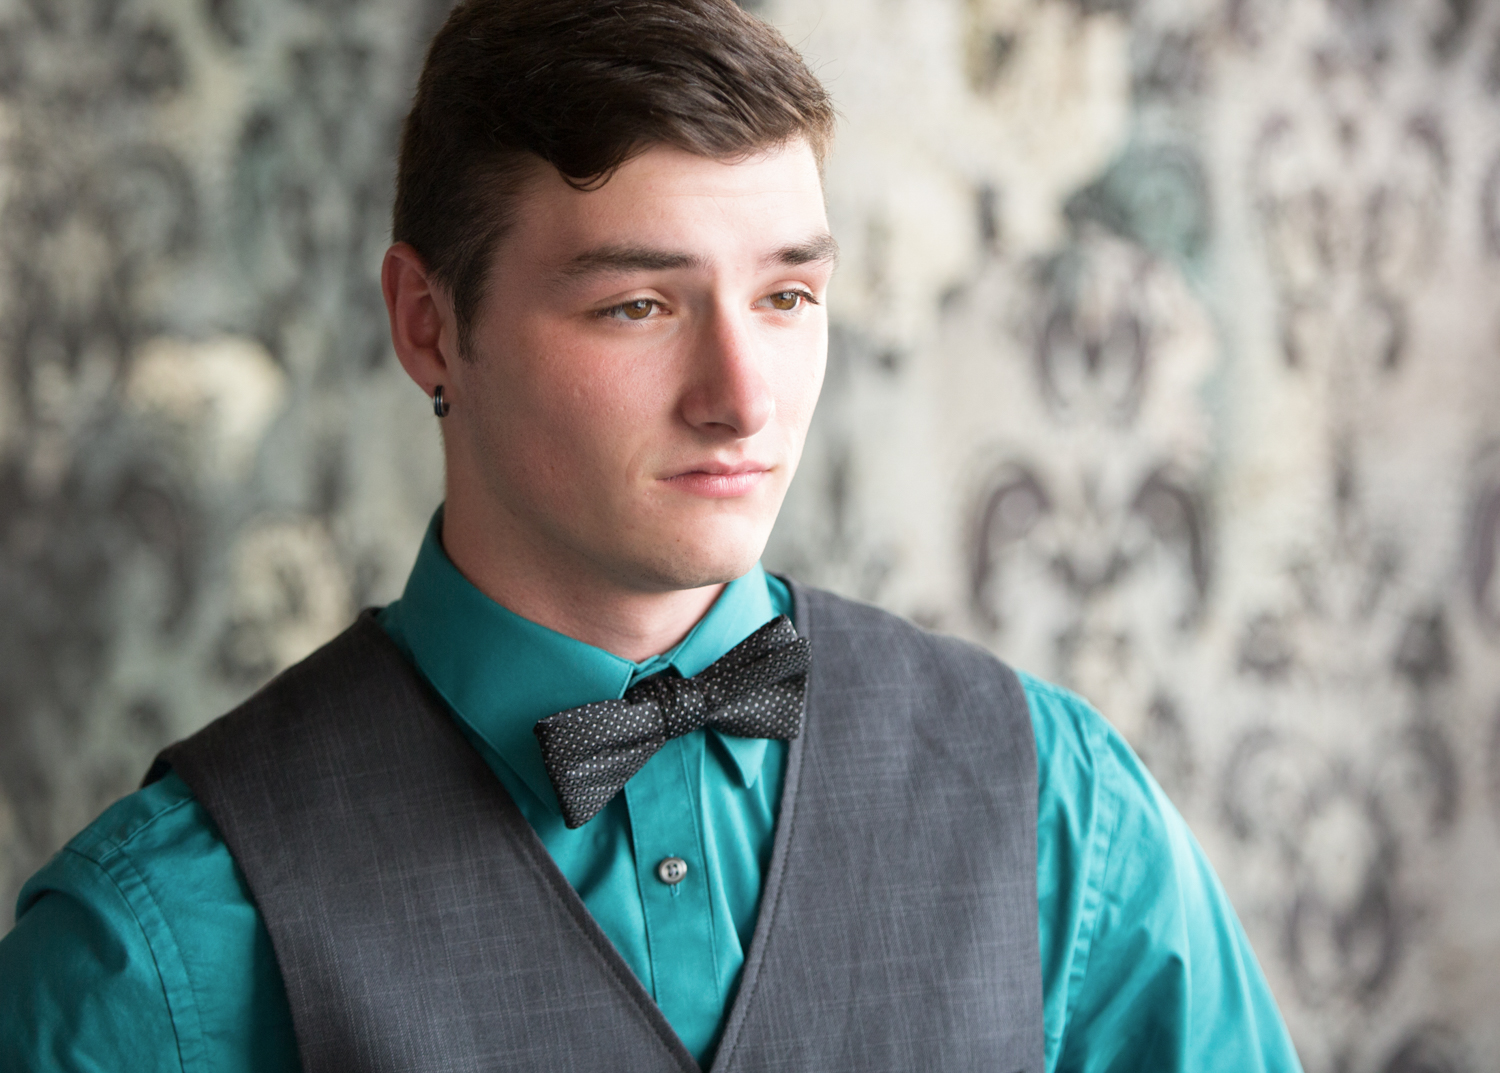 Portrait-HIgh-School-Seniors-boy-young-man-with-bow-tie-looking-concerned-203.jpg